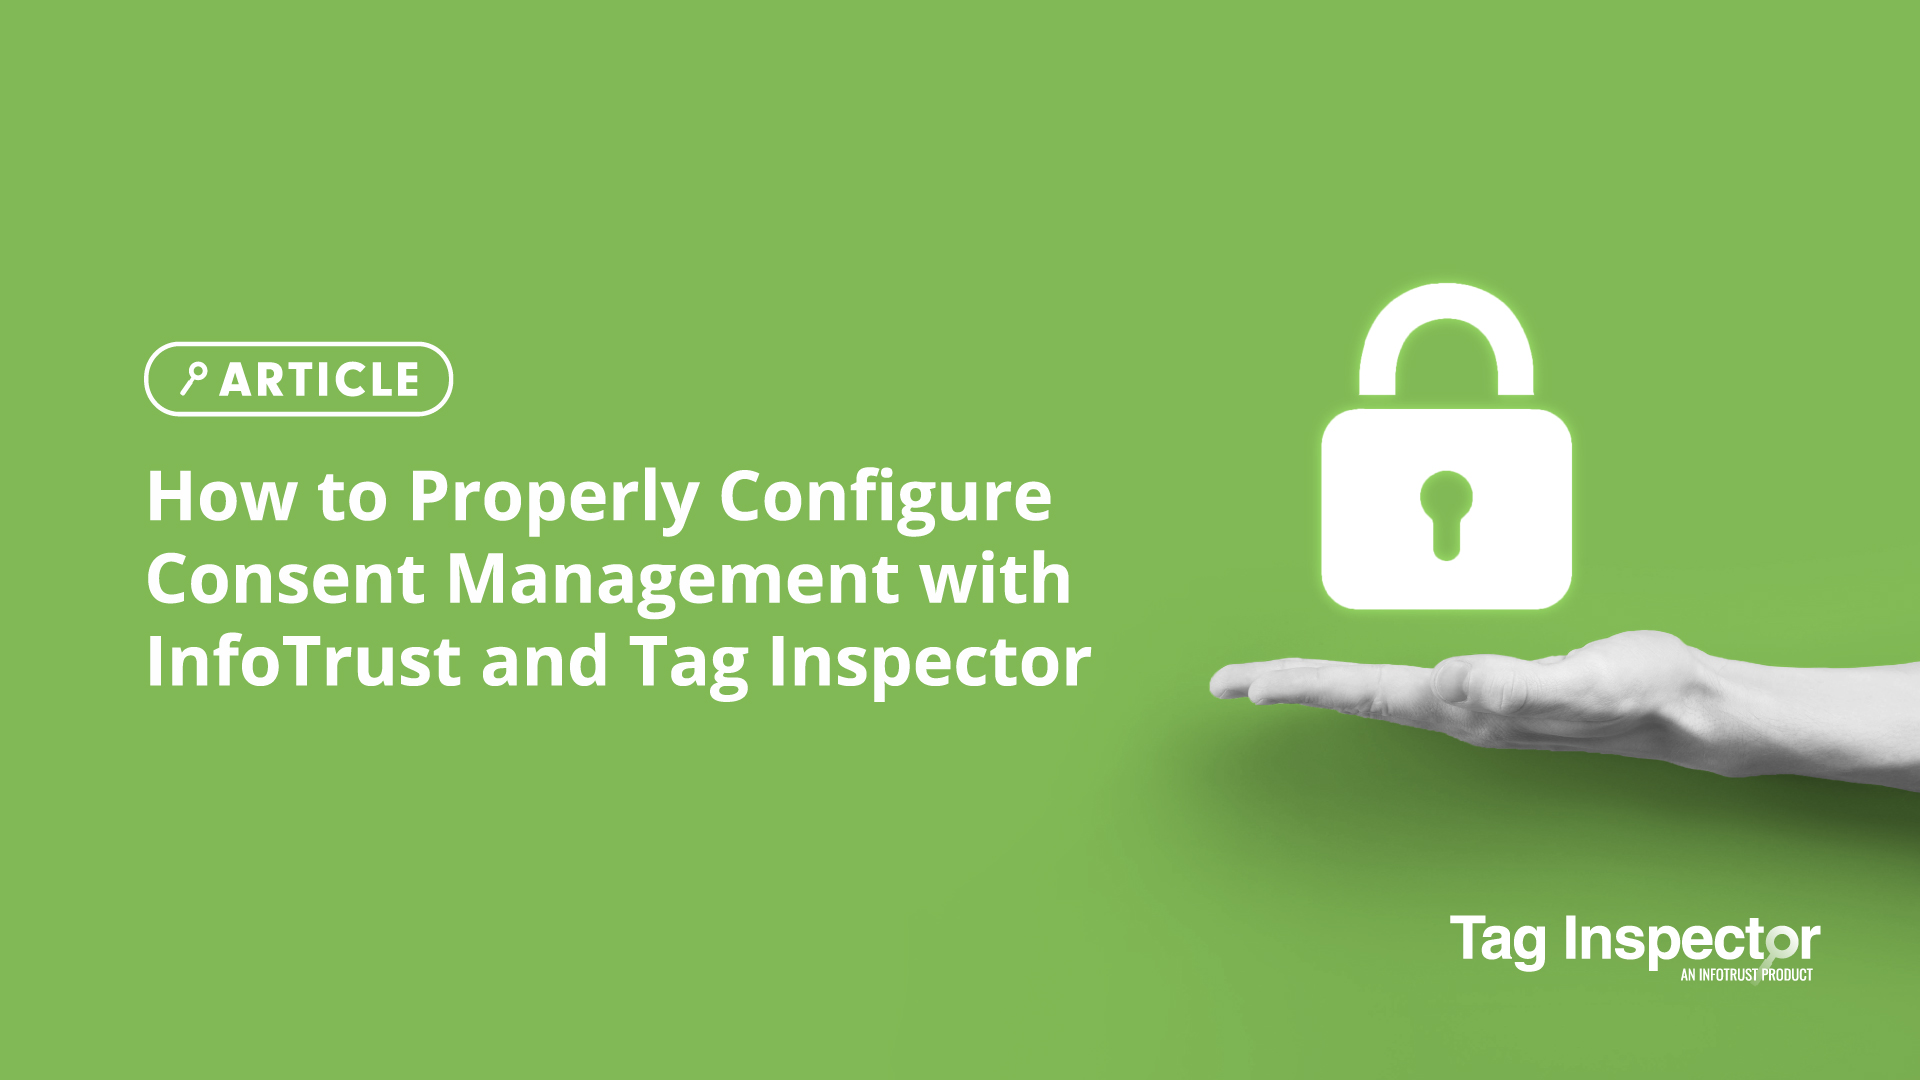 How to Properly Configure Consent Management with InfoTrust and Tag Inspector